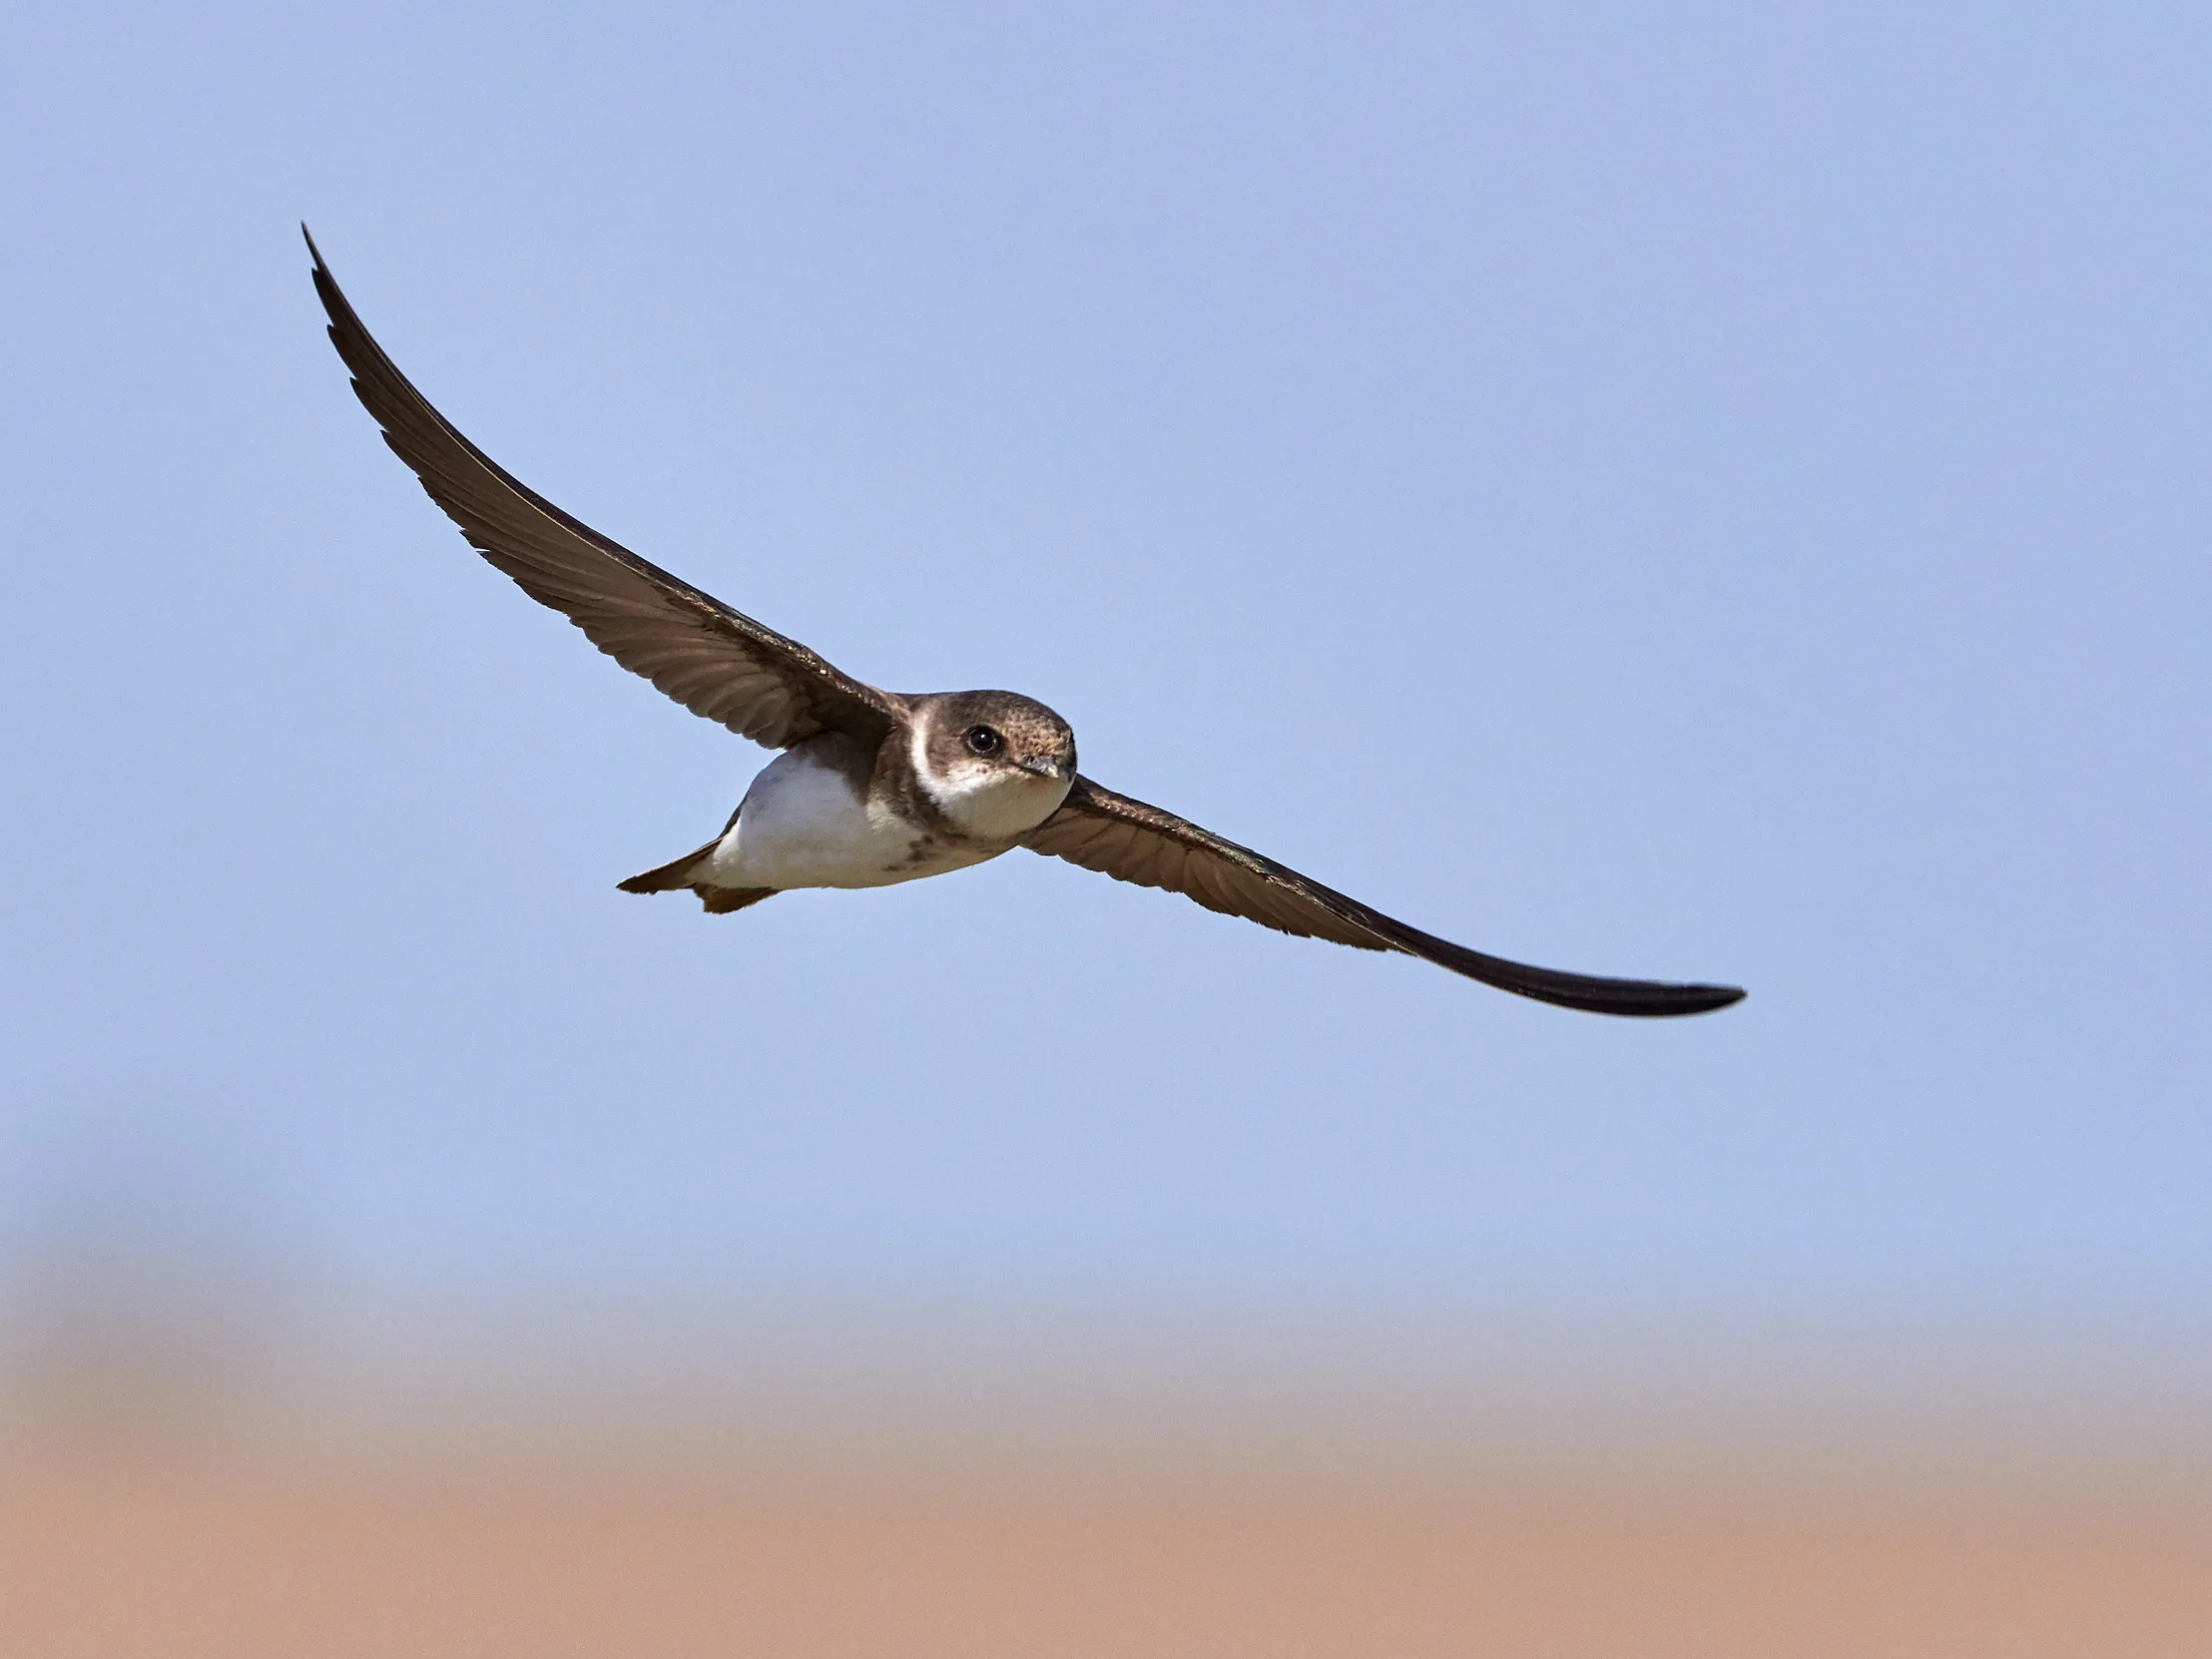 A lone Sand Martin mid flight against a pink and blue sky.